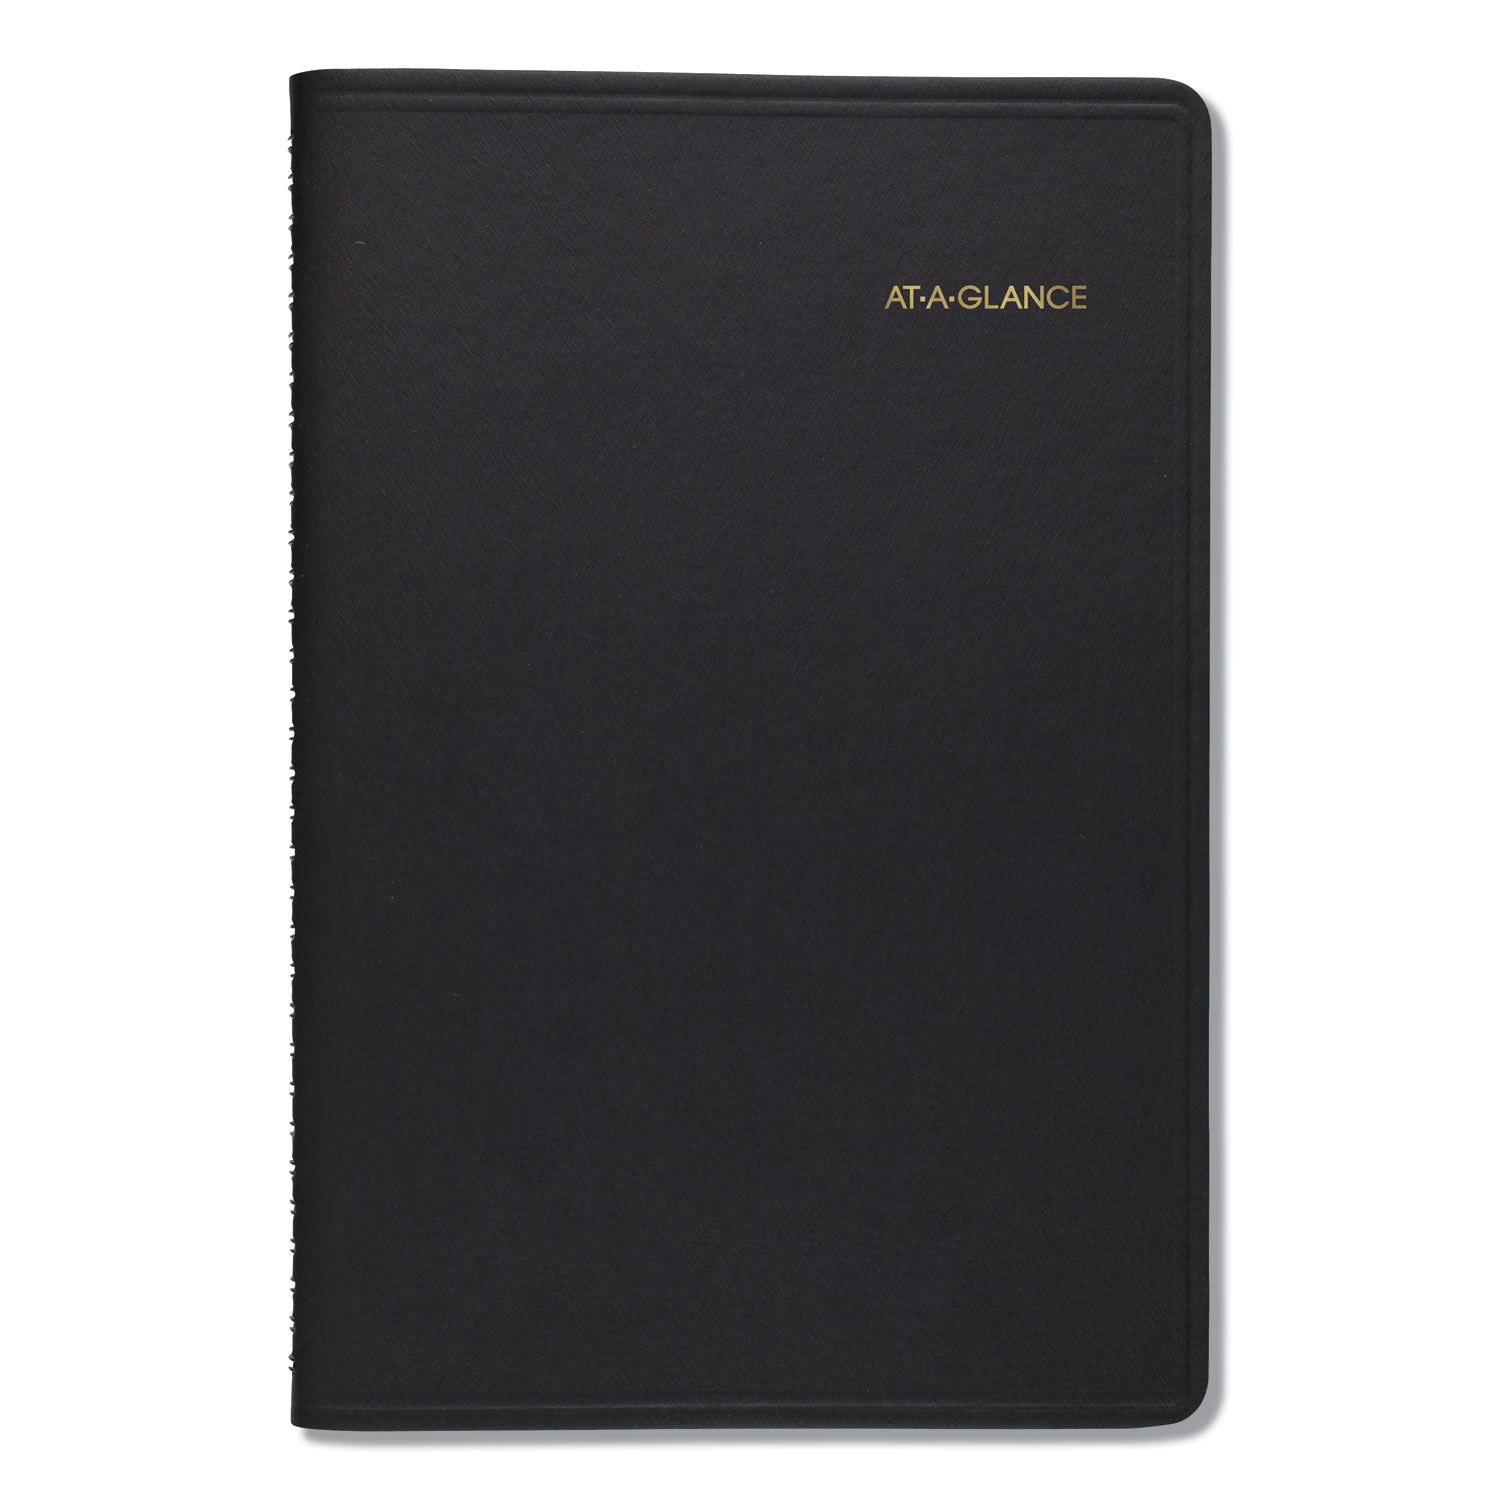  AT-A-GLANCE 7080005 Daily Appointment Book with 15-Minute Appointments, 8 x 4 7/8, Black, 2020 (AAG7080005) 